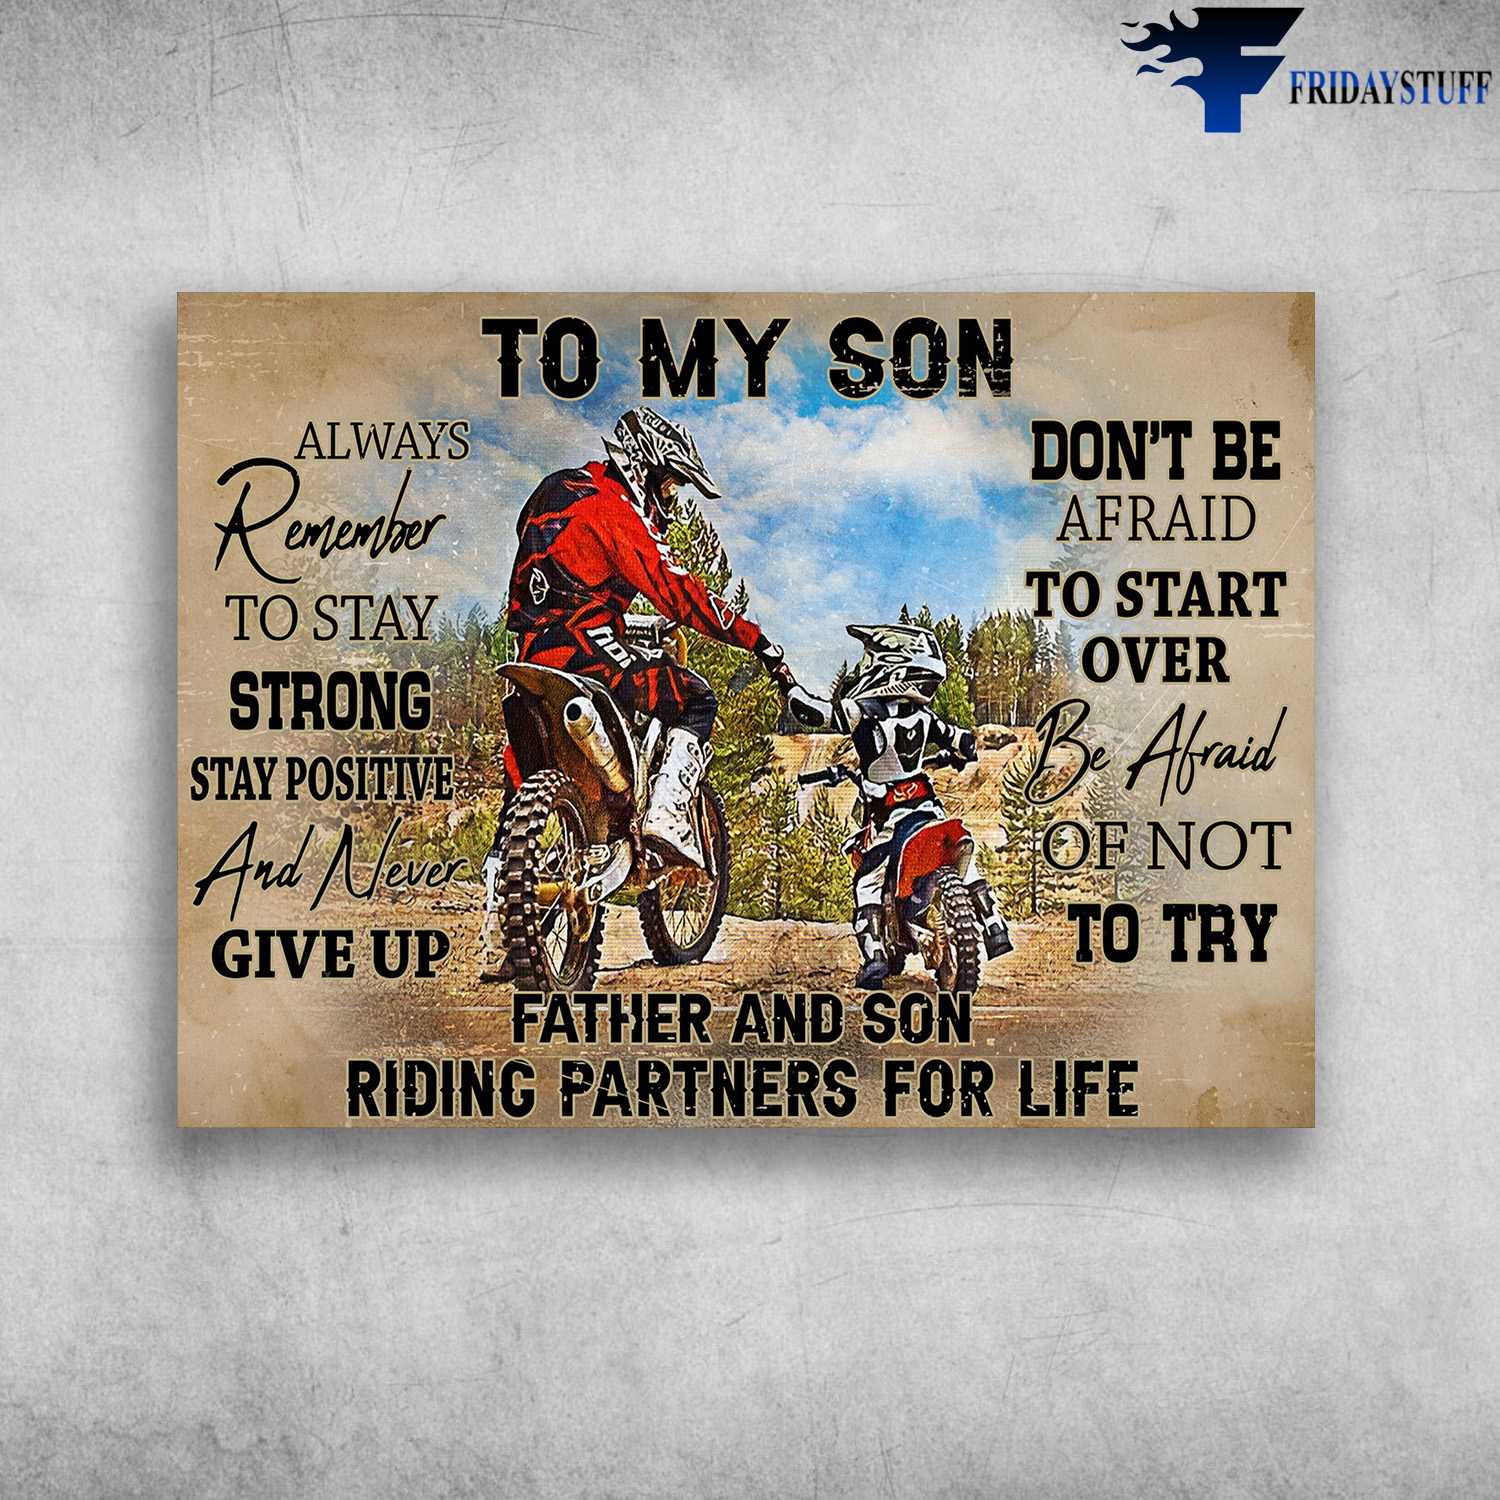 Dad And Son Motocross - To My Son, Always Remember To Say Strong, Stay Positive And Never Give Up, Father And Son, Riding Partners For Life, Dirtbike Lover